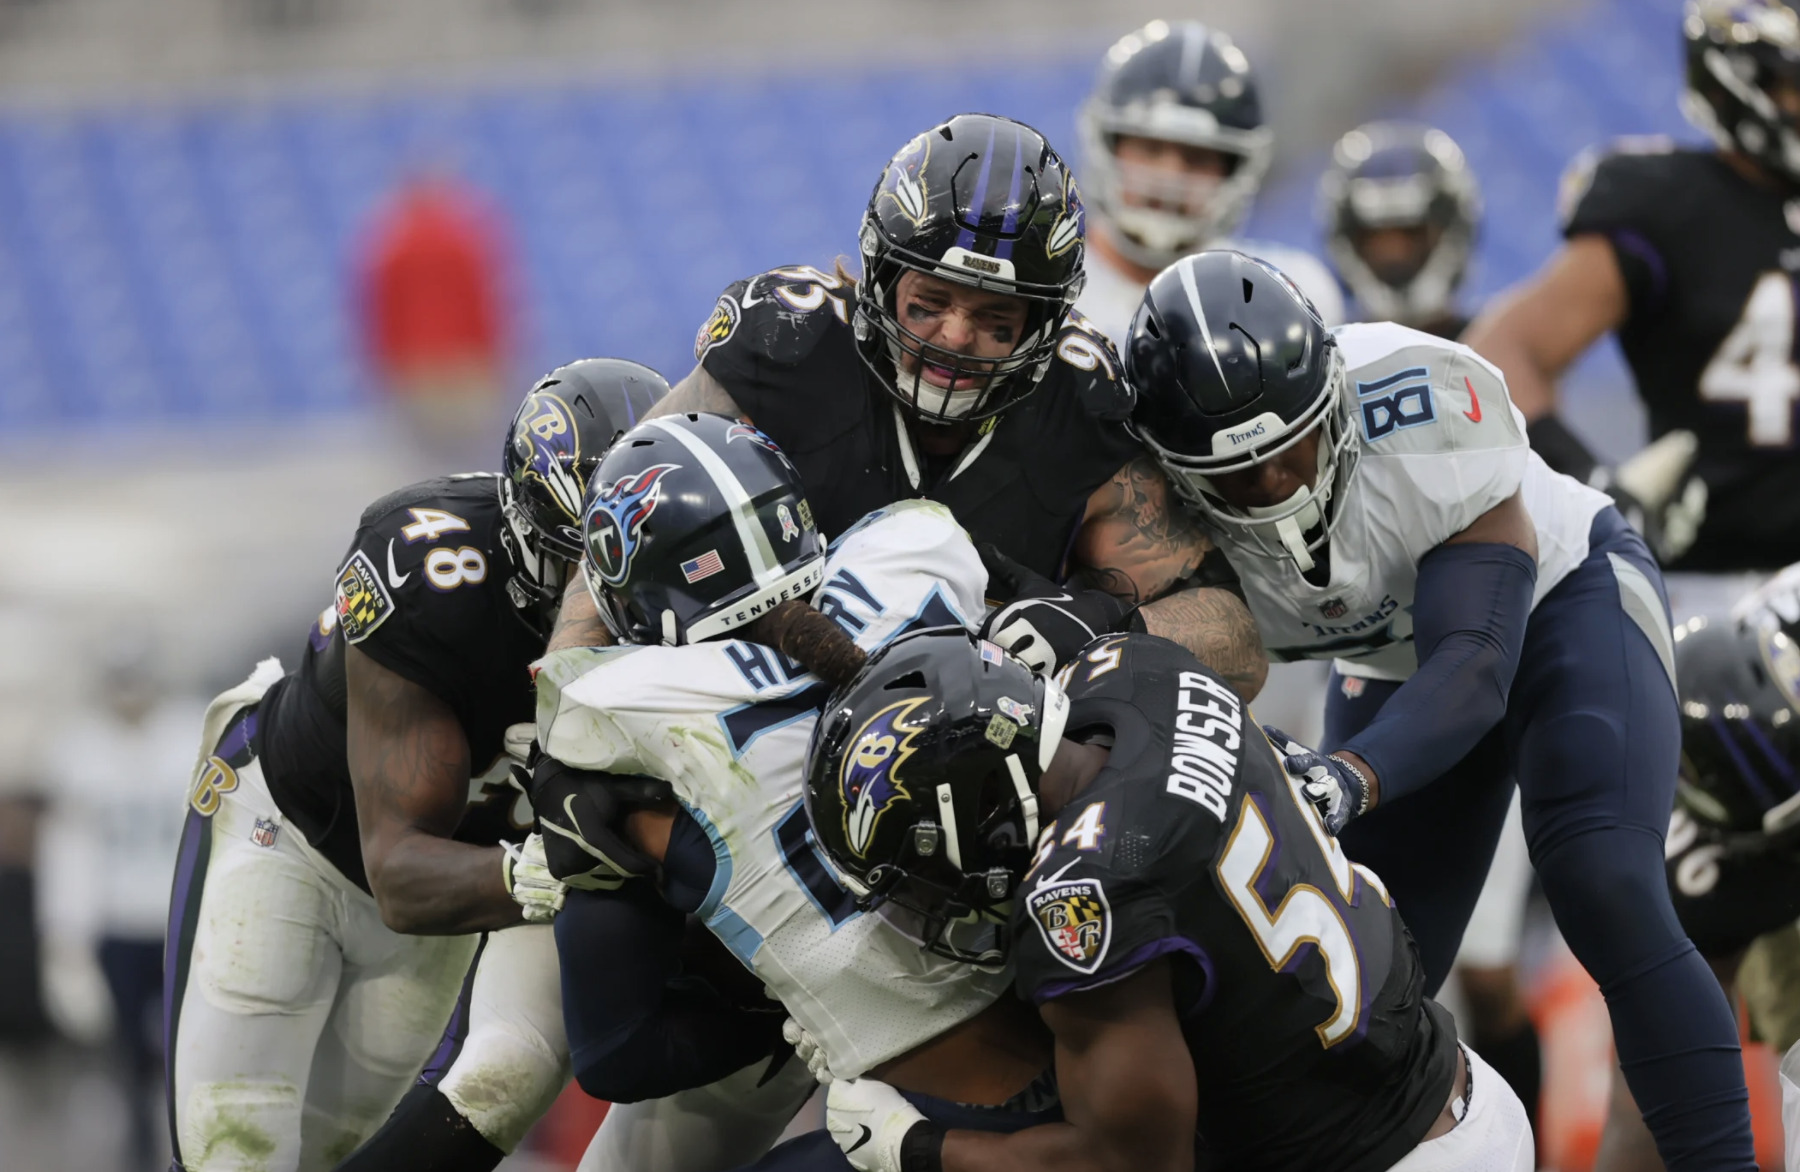 Derrick Henry tackled by Derek Wolfe and the Ravens against the Titans.